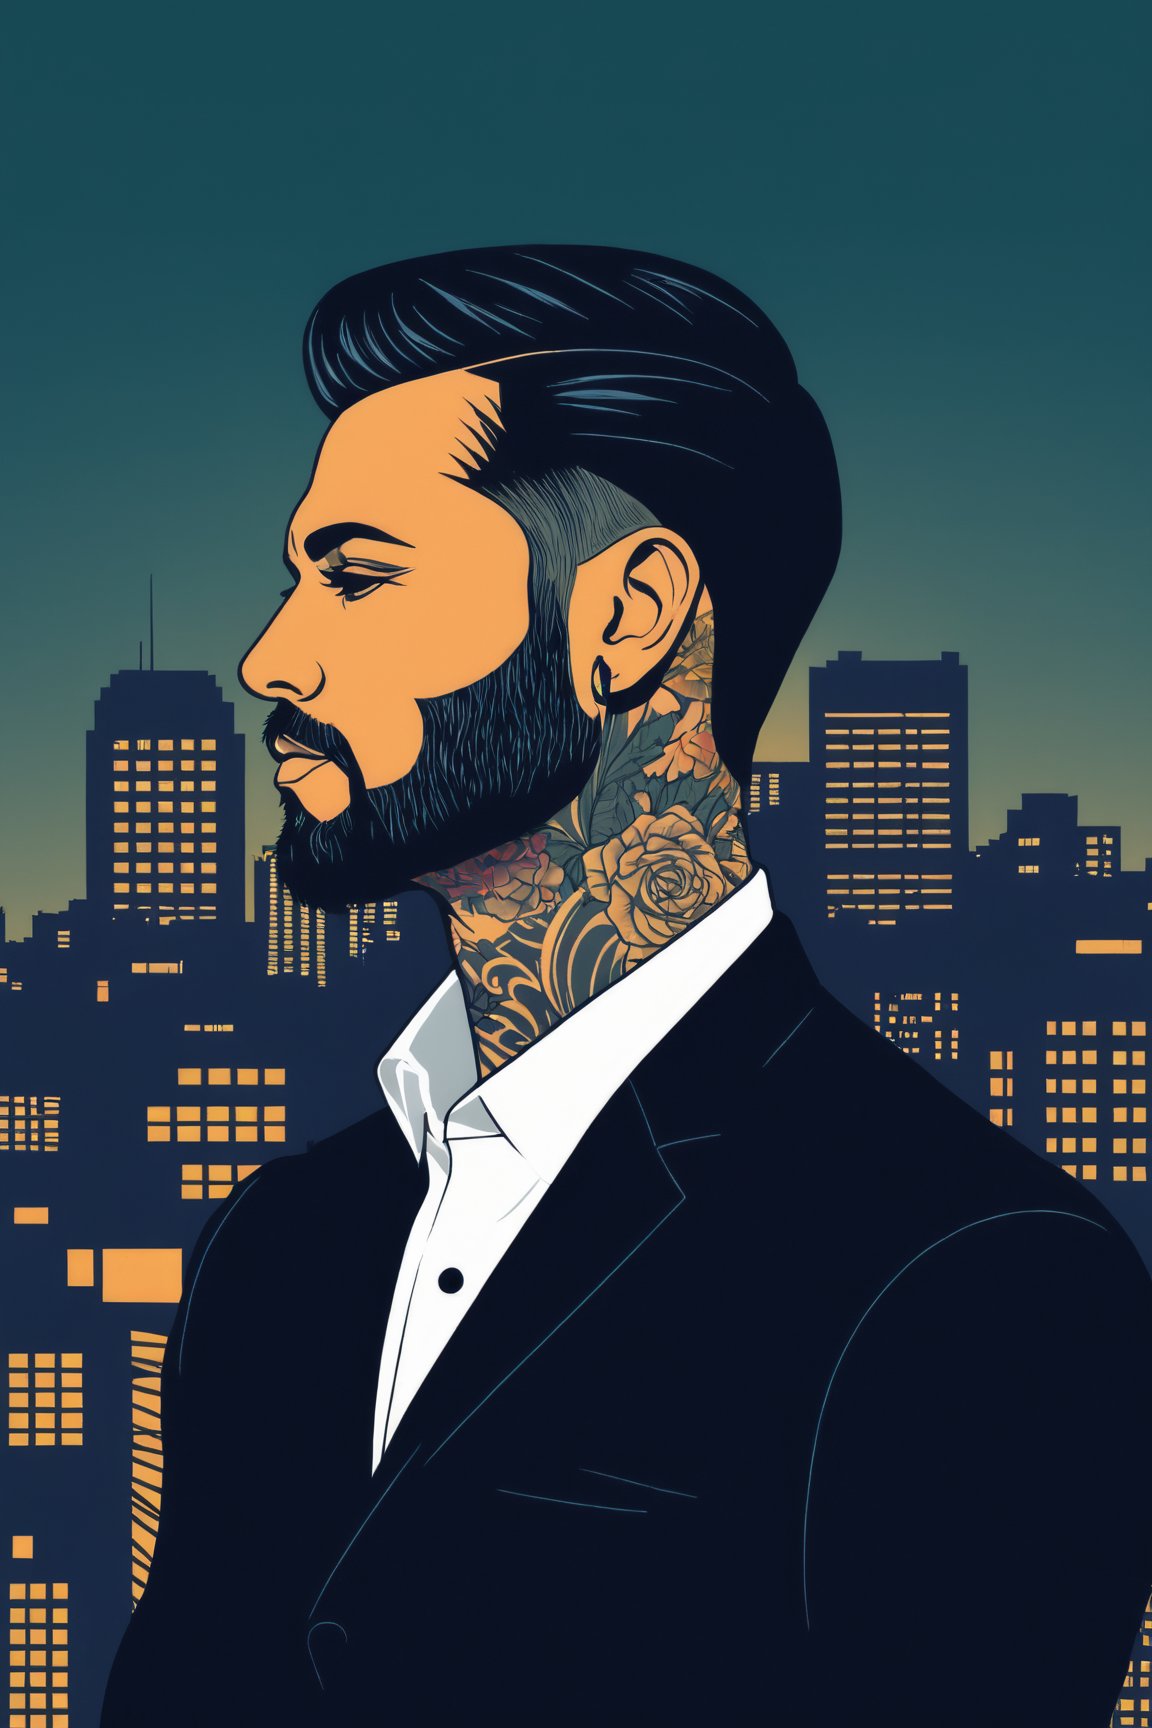 AiArtV, Flat Illustration, Vector Illustration, portrait,tattoo on her neck,man with neck tattoo,wearing a dark suit,city backdrop